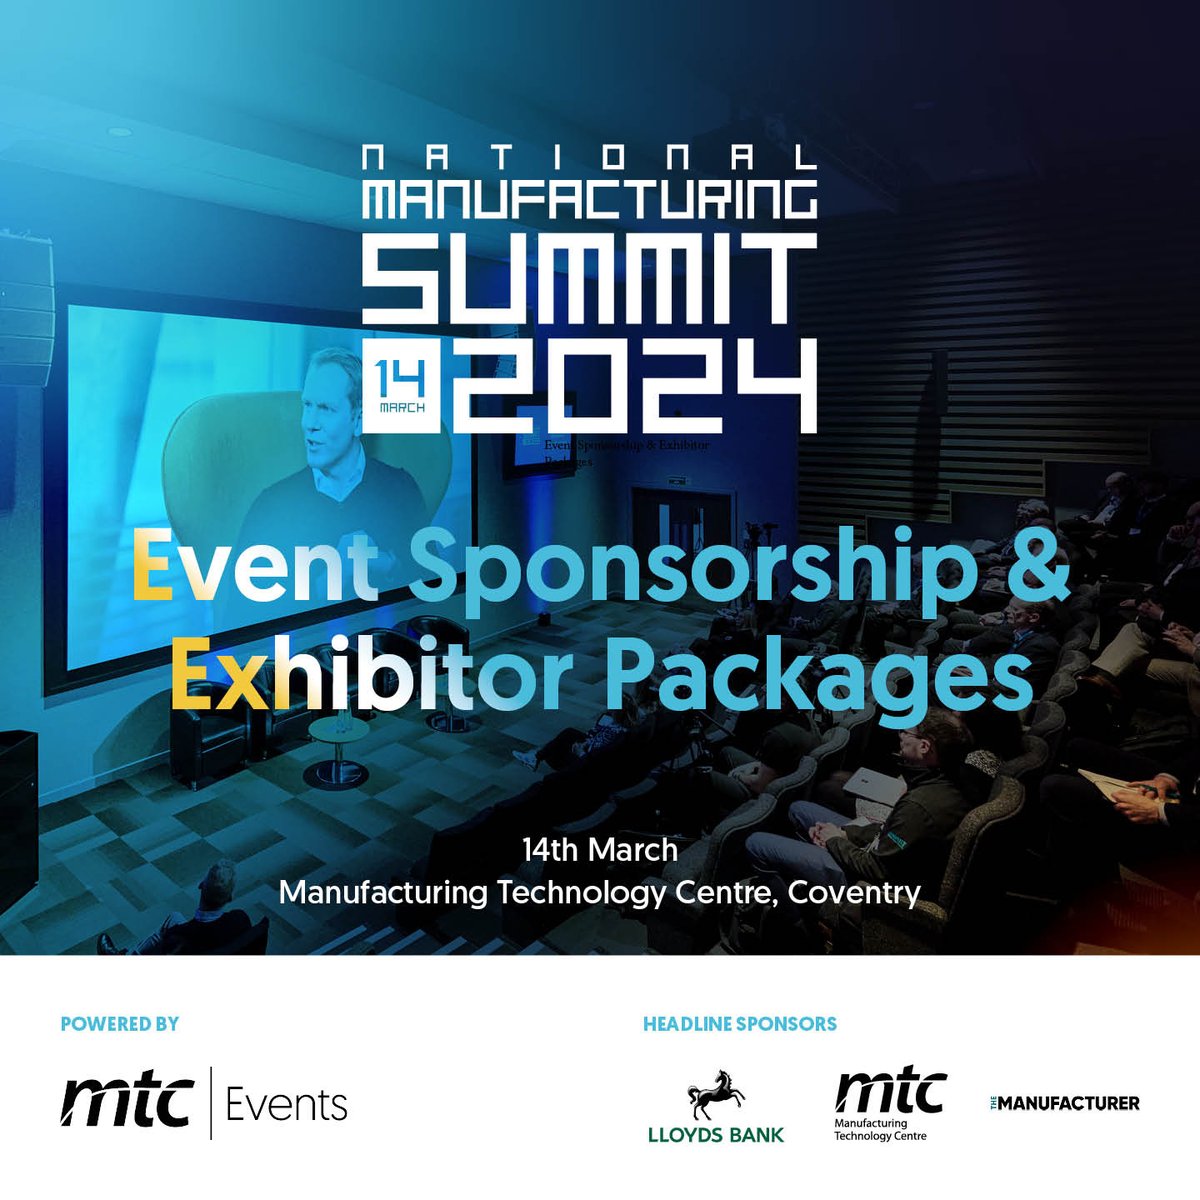 Secure your free ticket for the National Manufacturing Summit, returning to the MTC on 14th March! This year we’re focused on upskilling our workforce to meet the future needs of UK industry. This is one you don’t want to miss. Secure your place today: nmsummit.co.uk